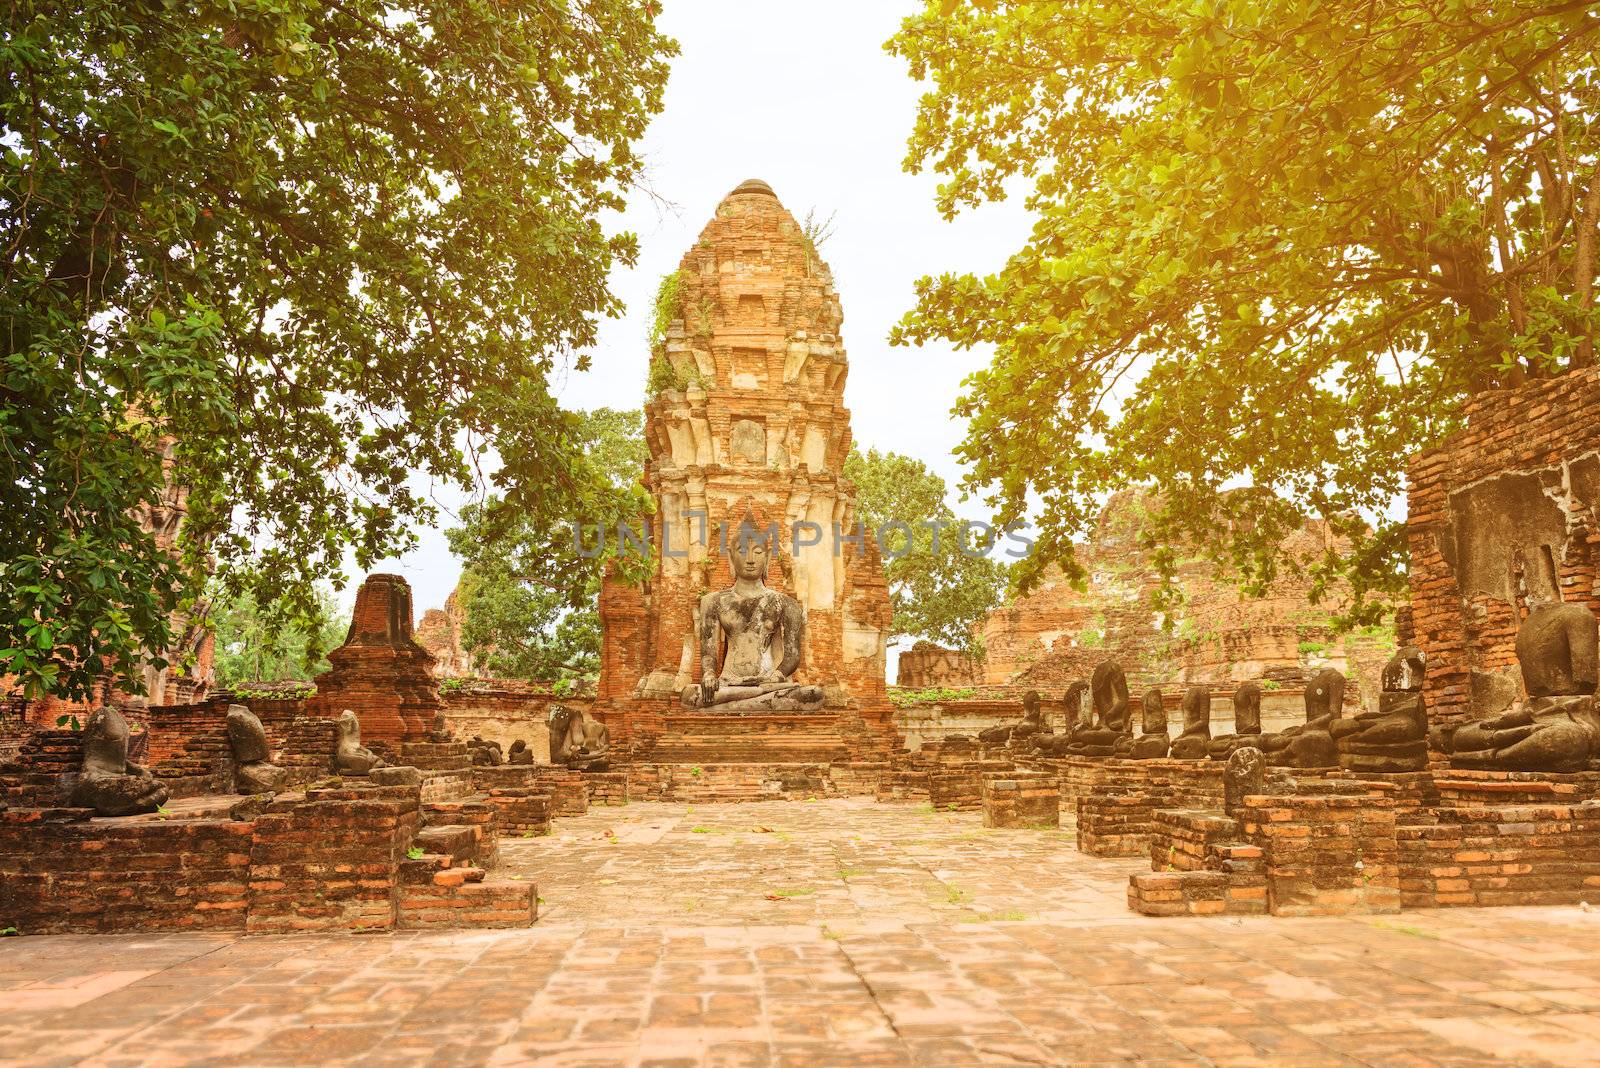 Ruins of old Buddhist Wat Mahathat temple with stupa chedi and destroied Buddha statues, Ayutthaya, Thailand 